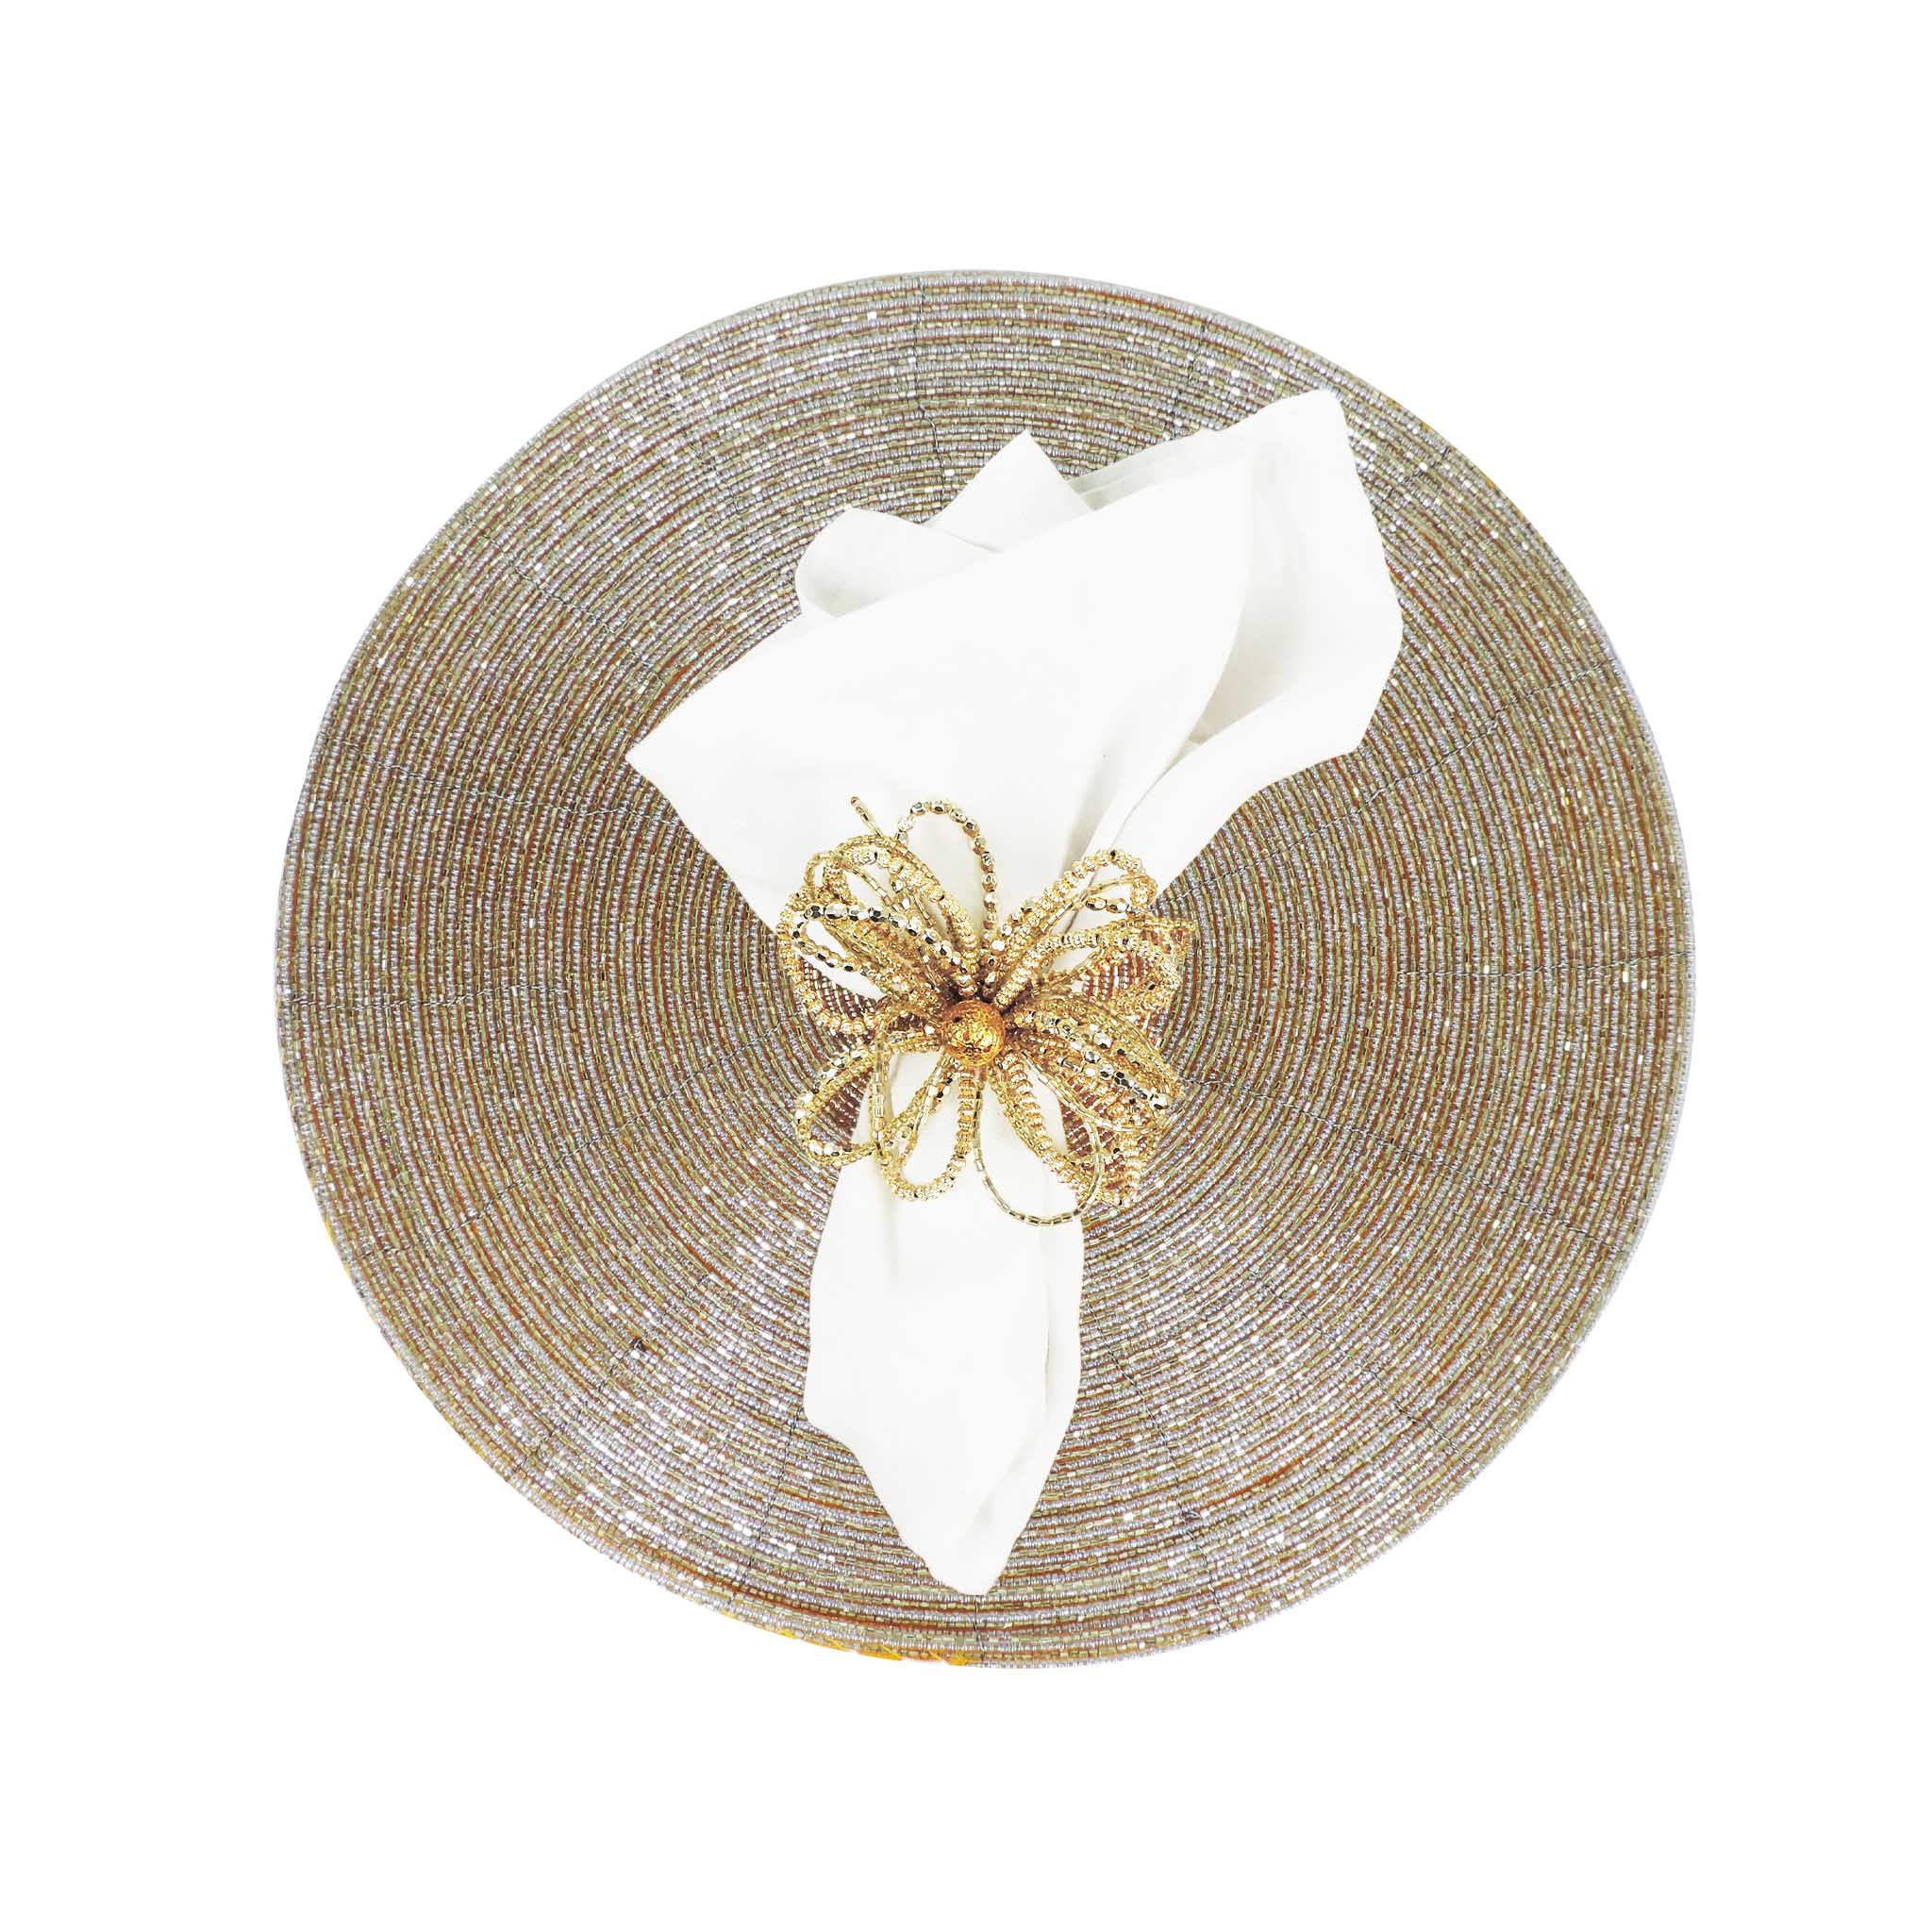 Glass Beaded Placemat in Champagne Gold, Set of 4